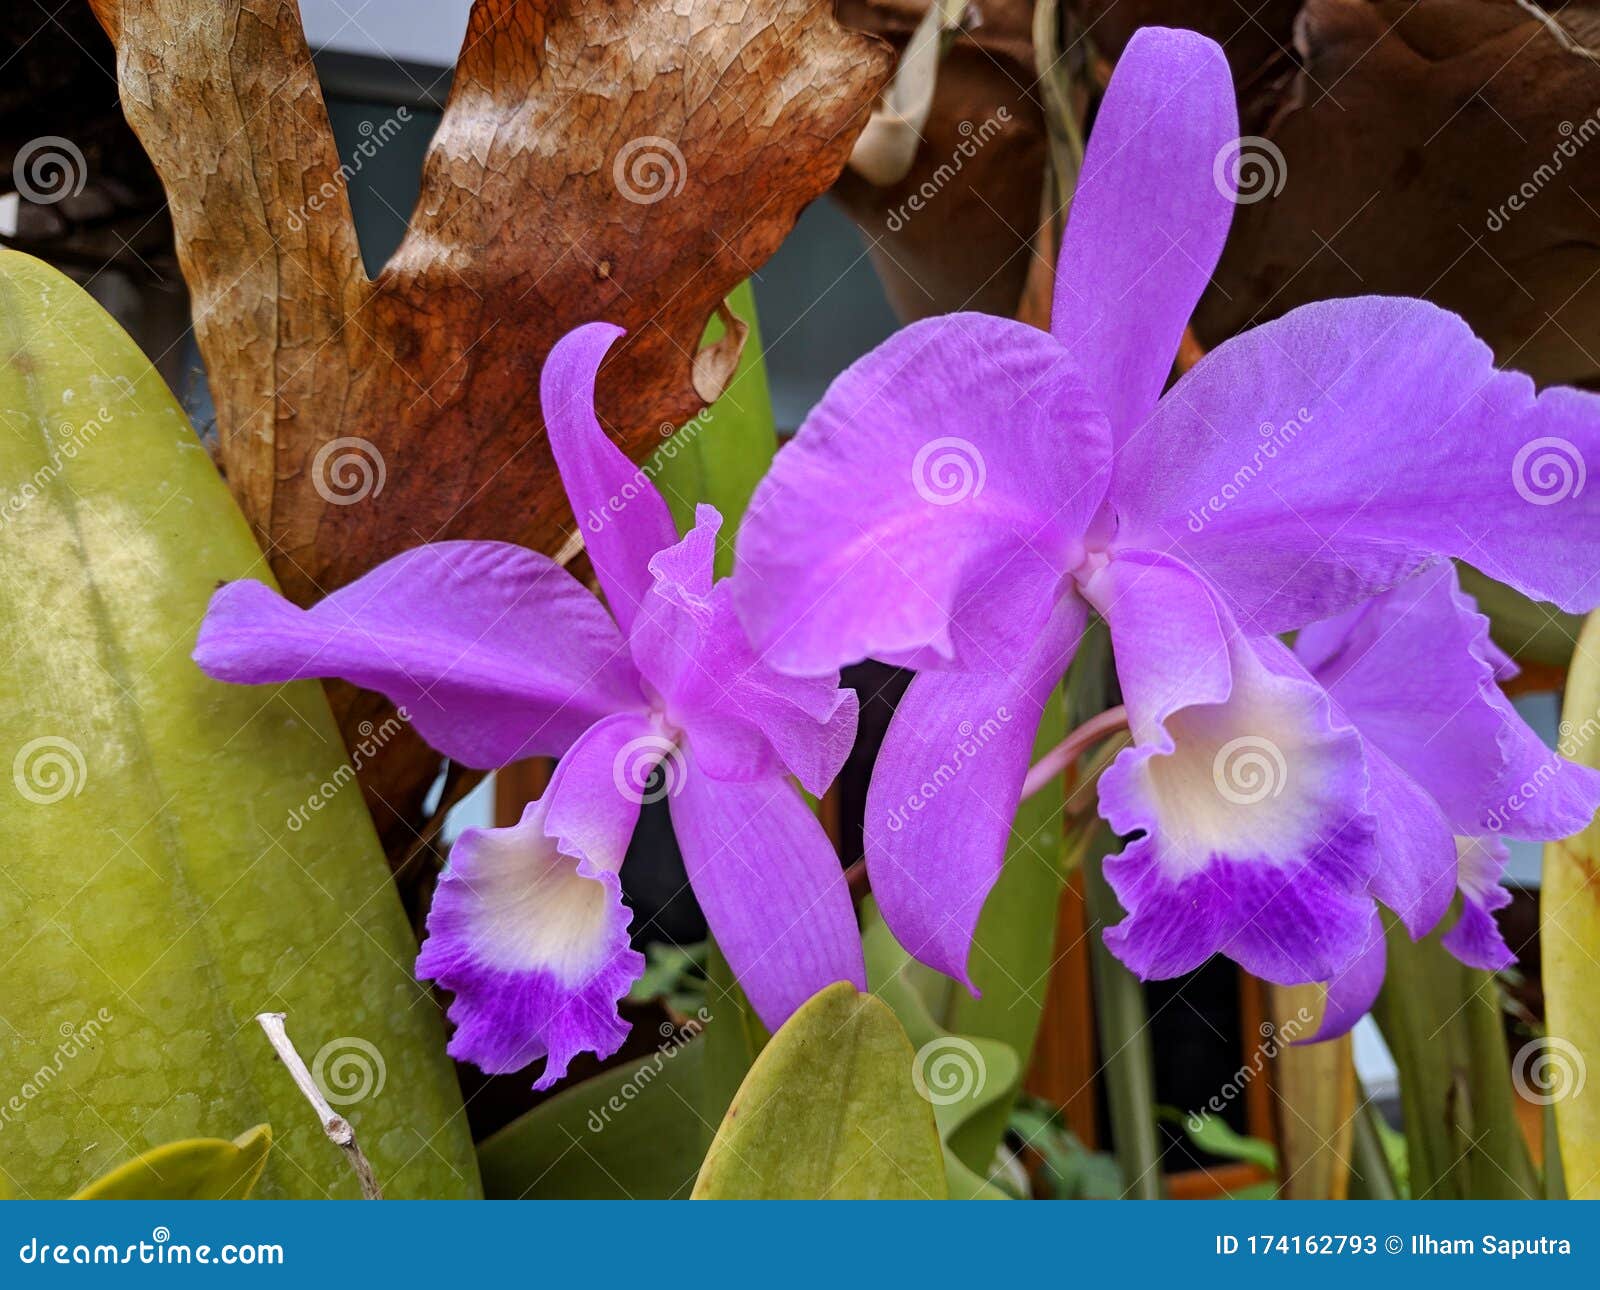 Guarianthe is a Purple Orchids Flower. Guaria Morada Orchid Stock Image -  Image of epiphytic, closeup: 174162793